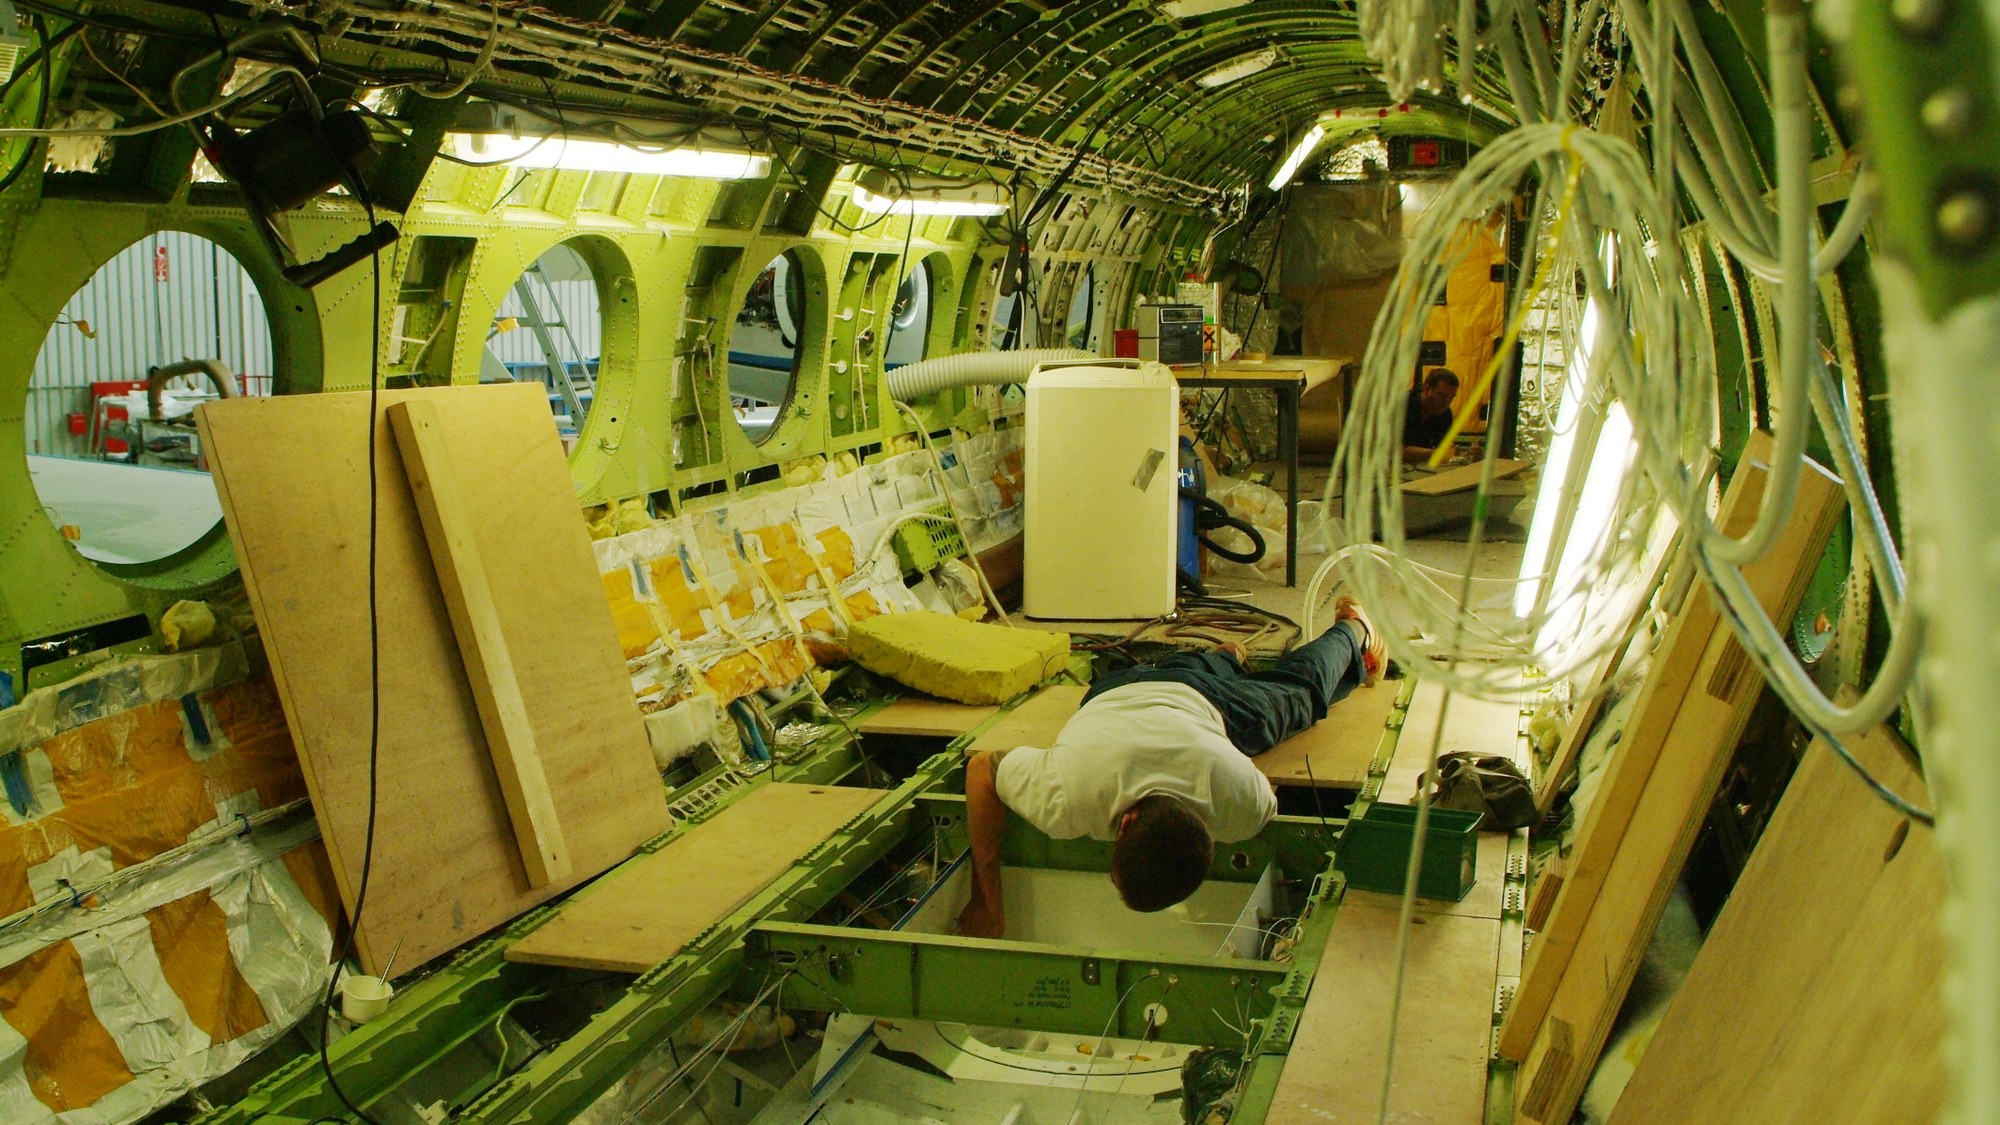 Extensive modifications in the interior of the HALO research aircraft